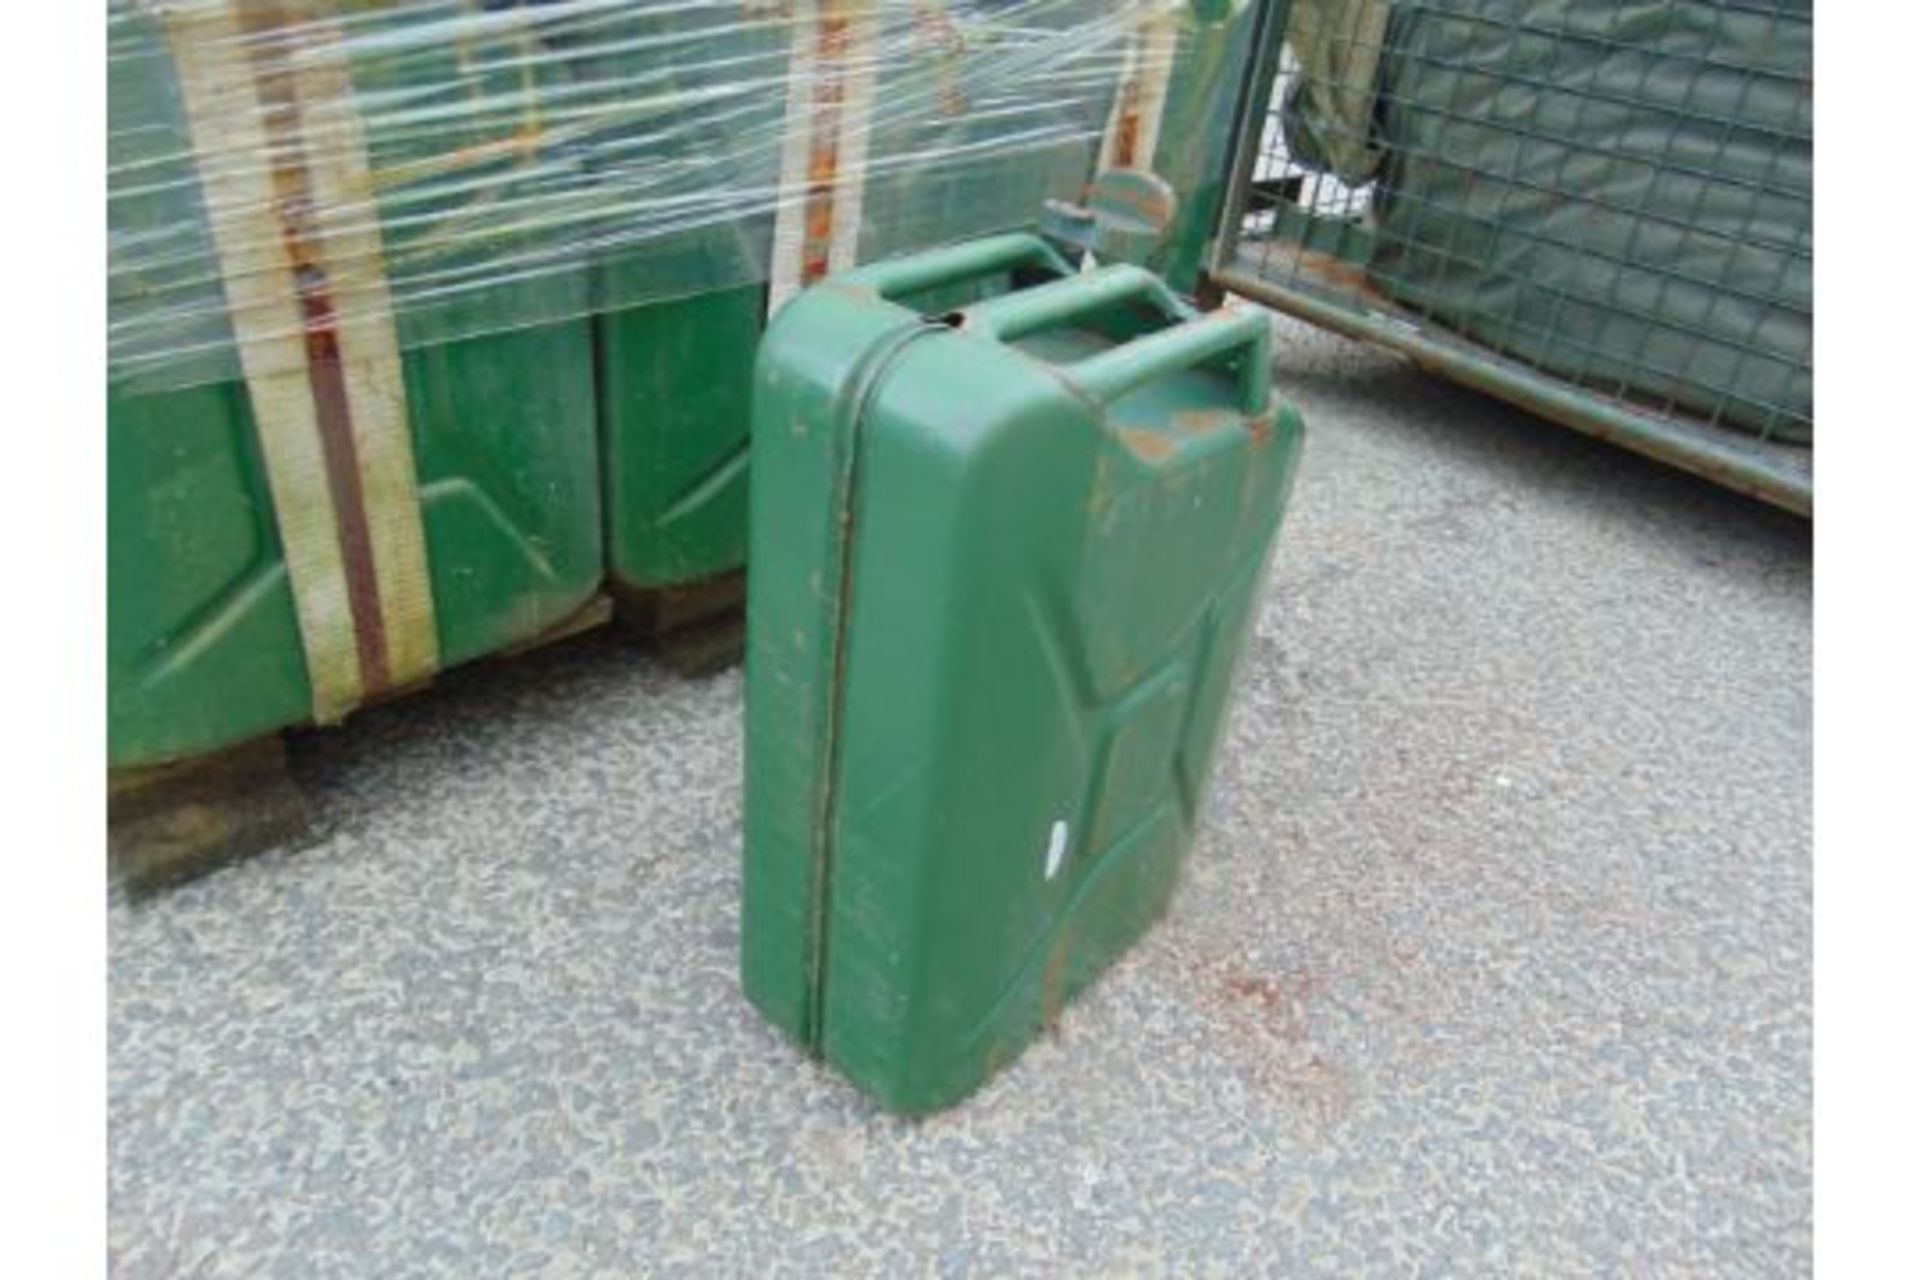 96X UNUSED 5 GALL (20 LITRE) JERRY CANS DIRECT FROM STORAGE - Image 4 of 6